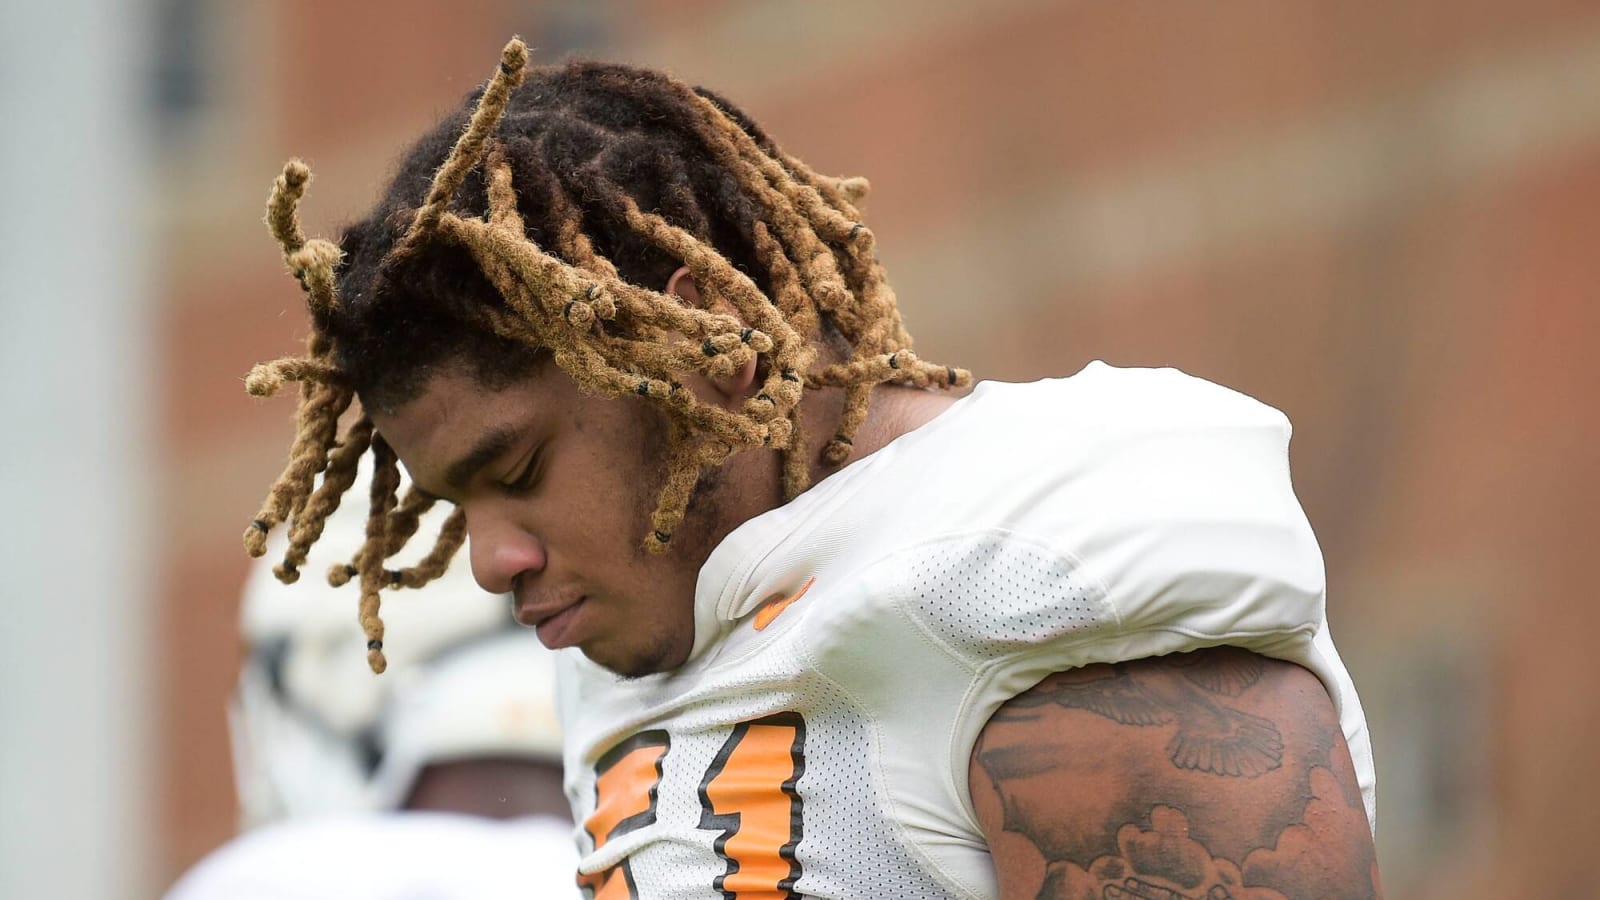 Tennessee Vols transfer player reacts to NCAA investigation with a laugh